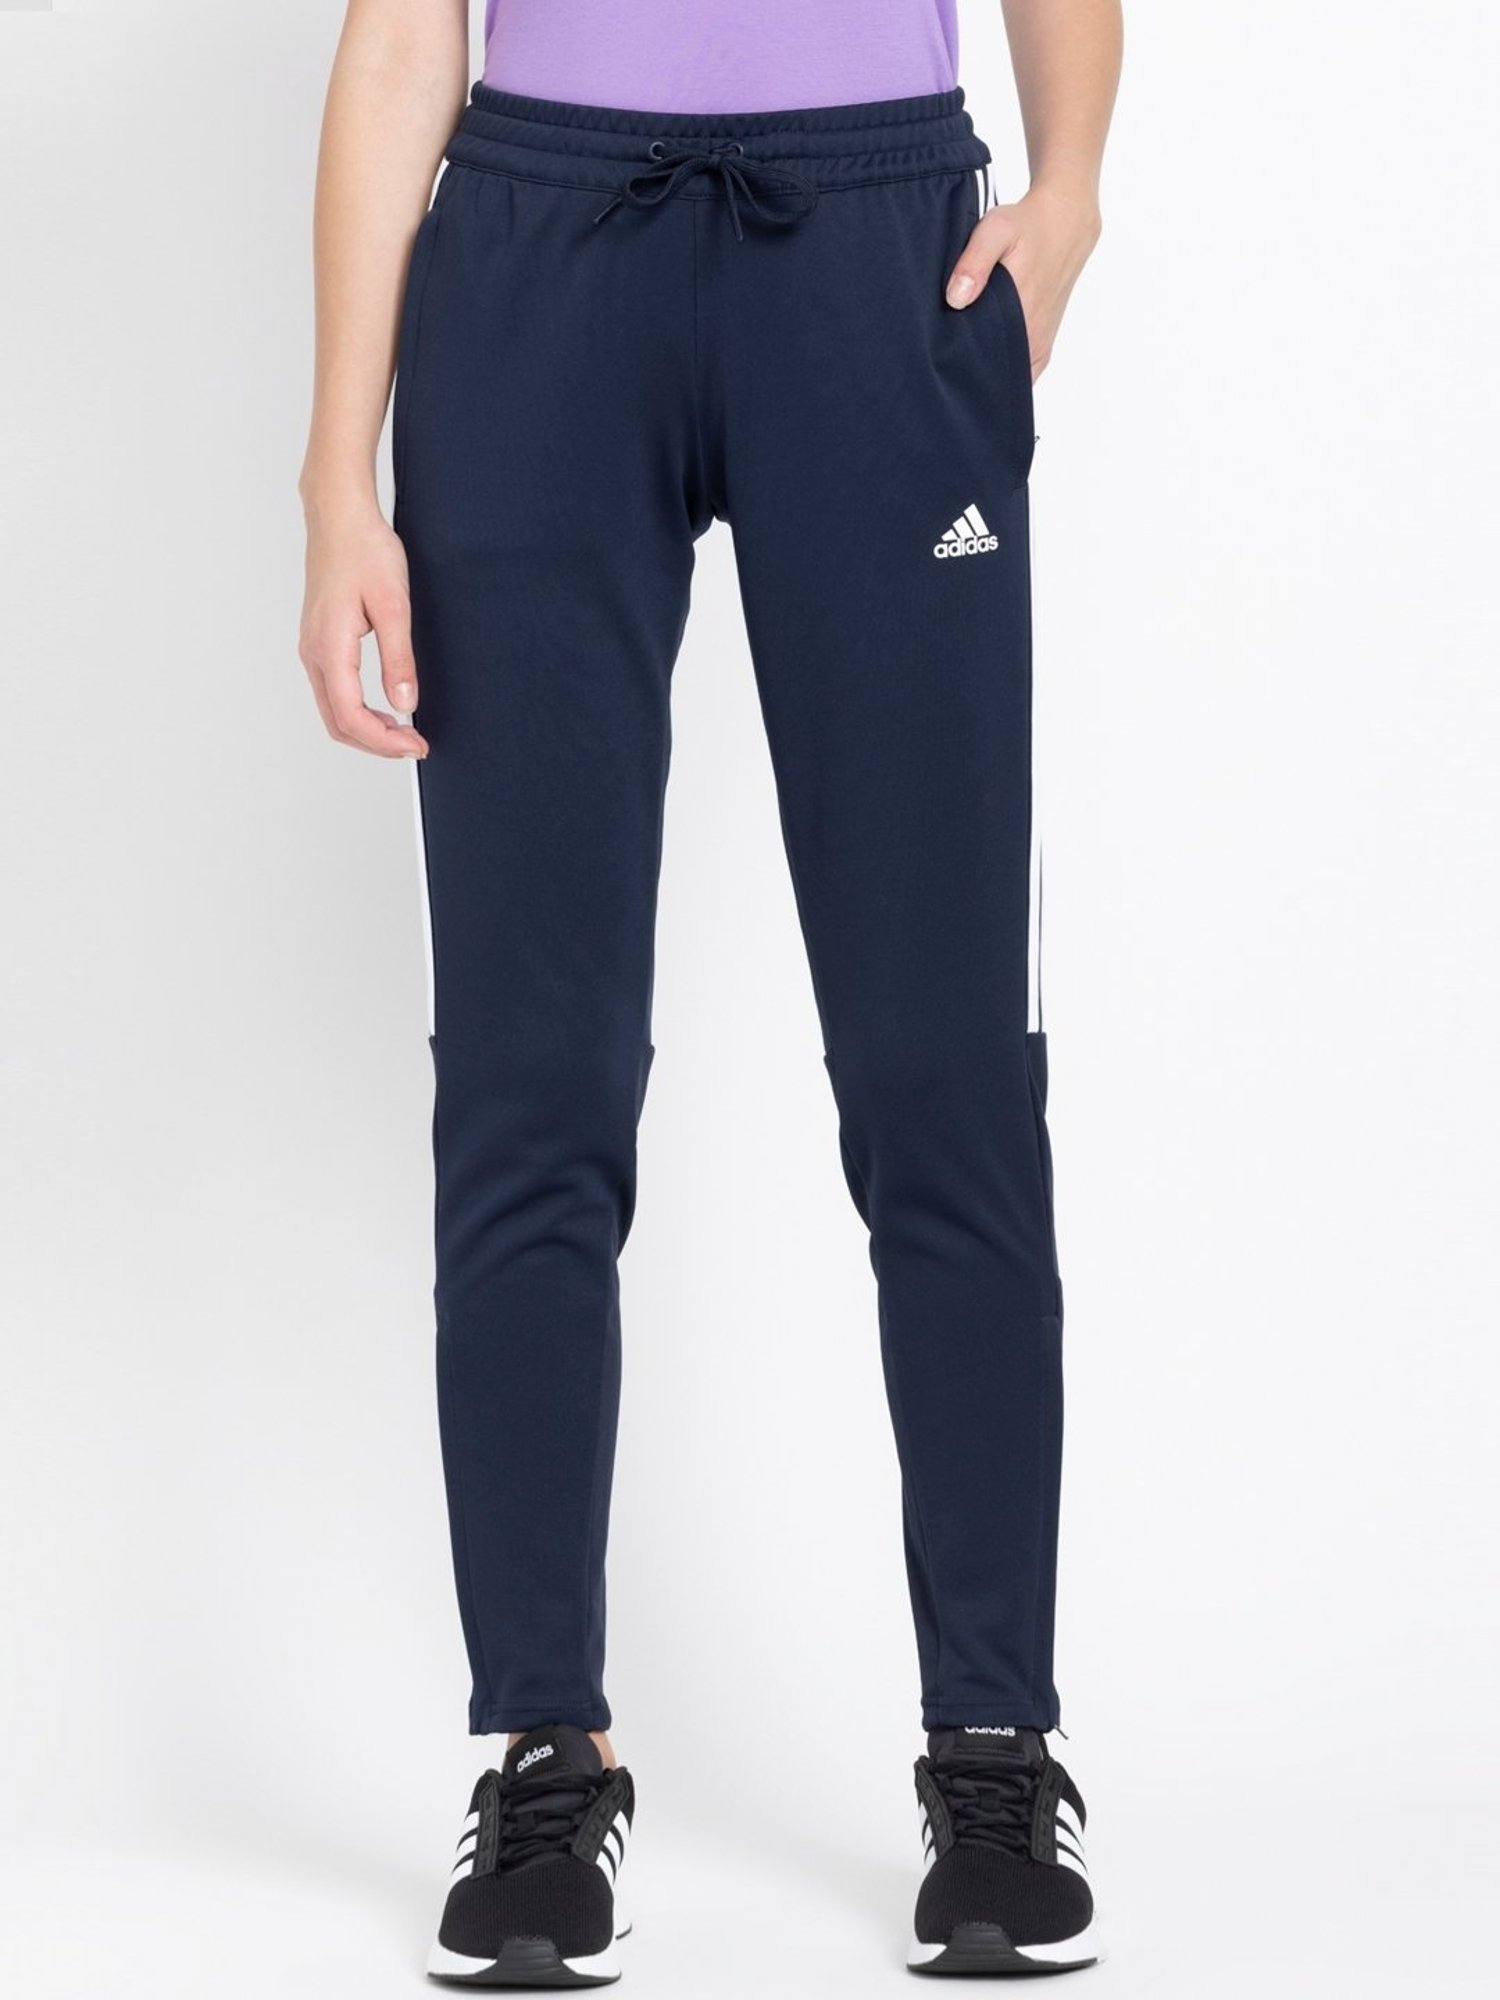 ADIDAS ORIGINALS Striped Women Red, White Track Pants - Buy ADIDAS  ORIGINALS Striped Women Red, White Track Pants Online at Best Prices in  India | Flipkart.com